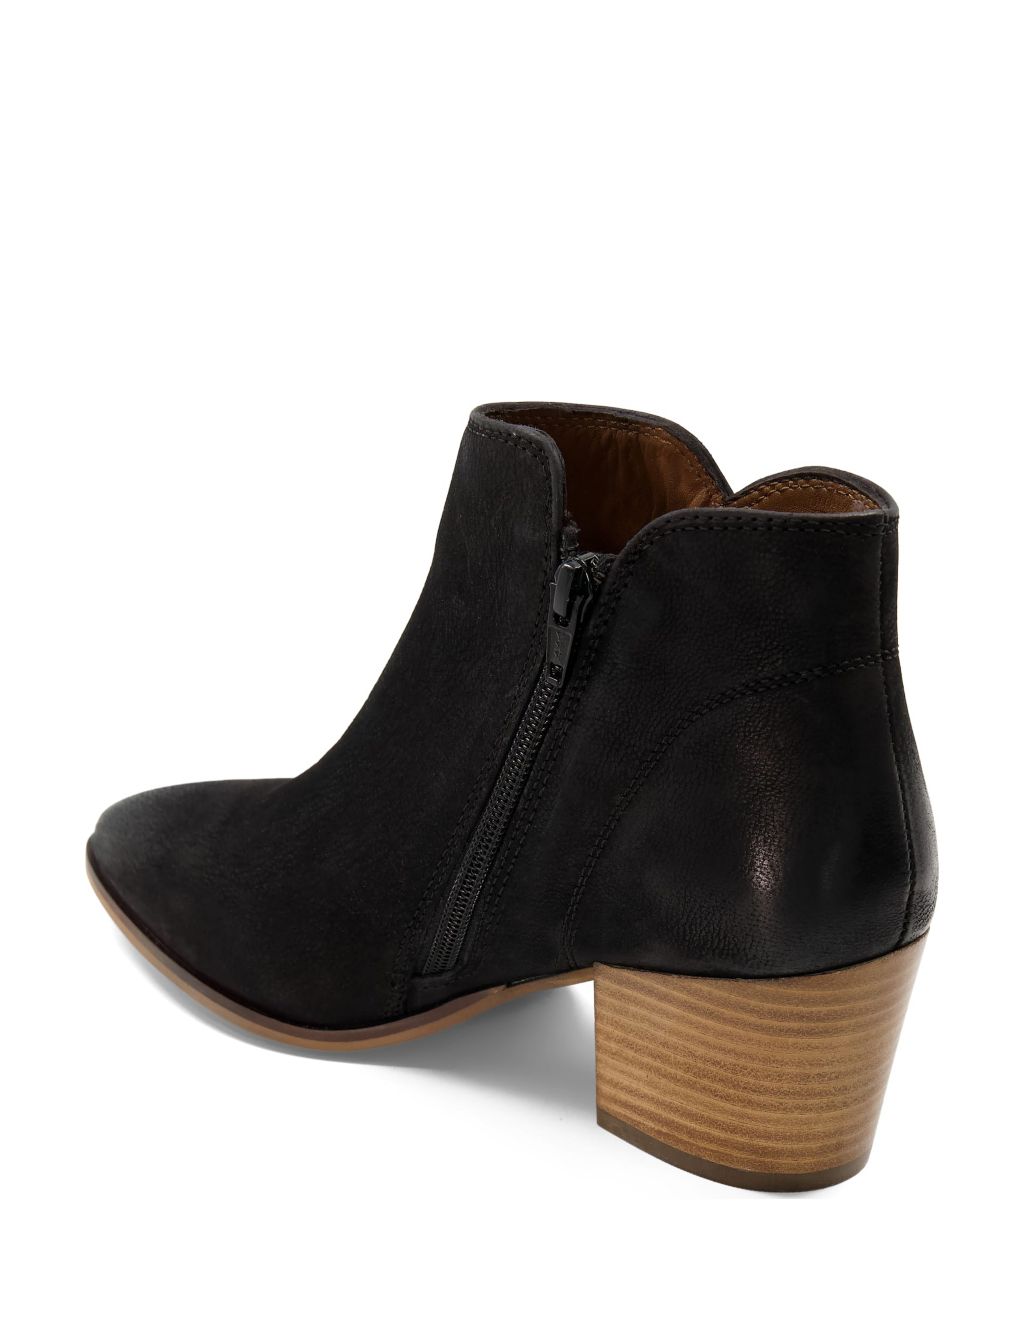 Wide Fit Suede Block Heel Ankle Boots image 4